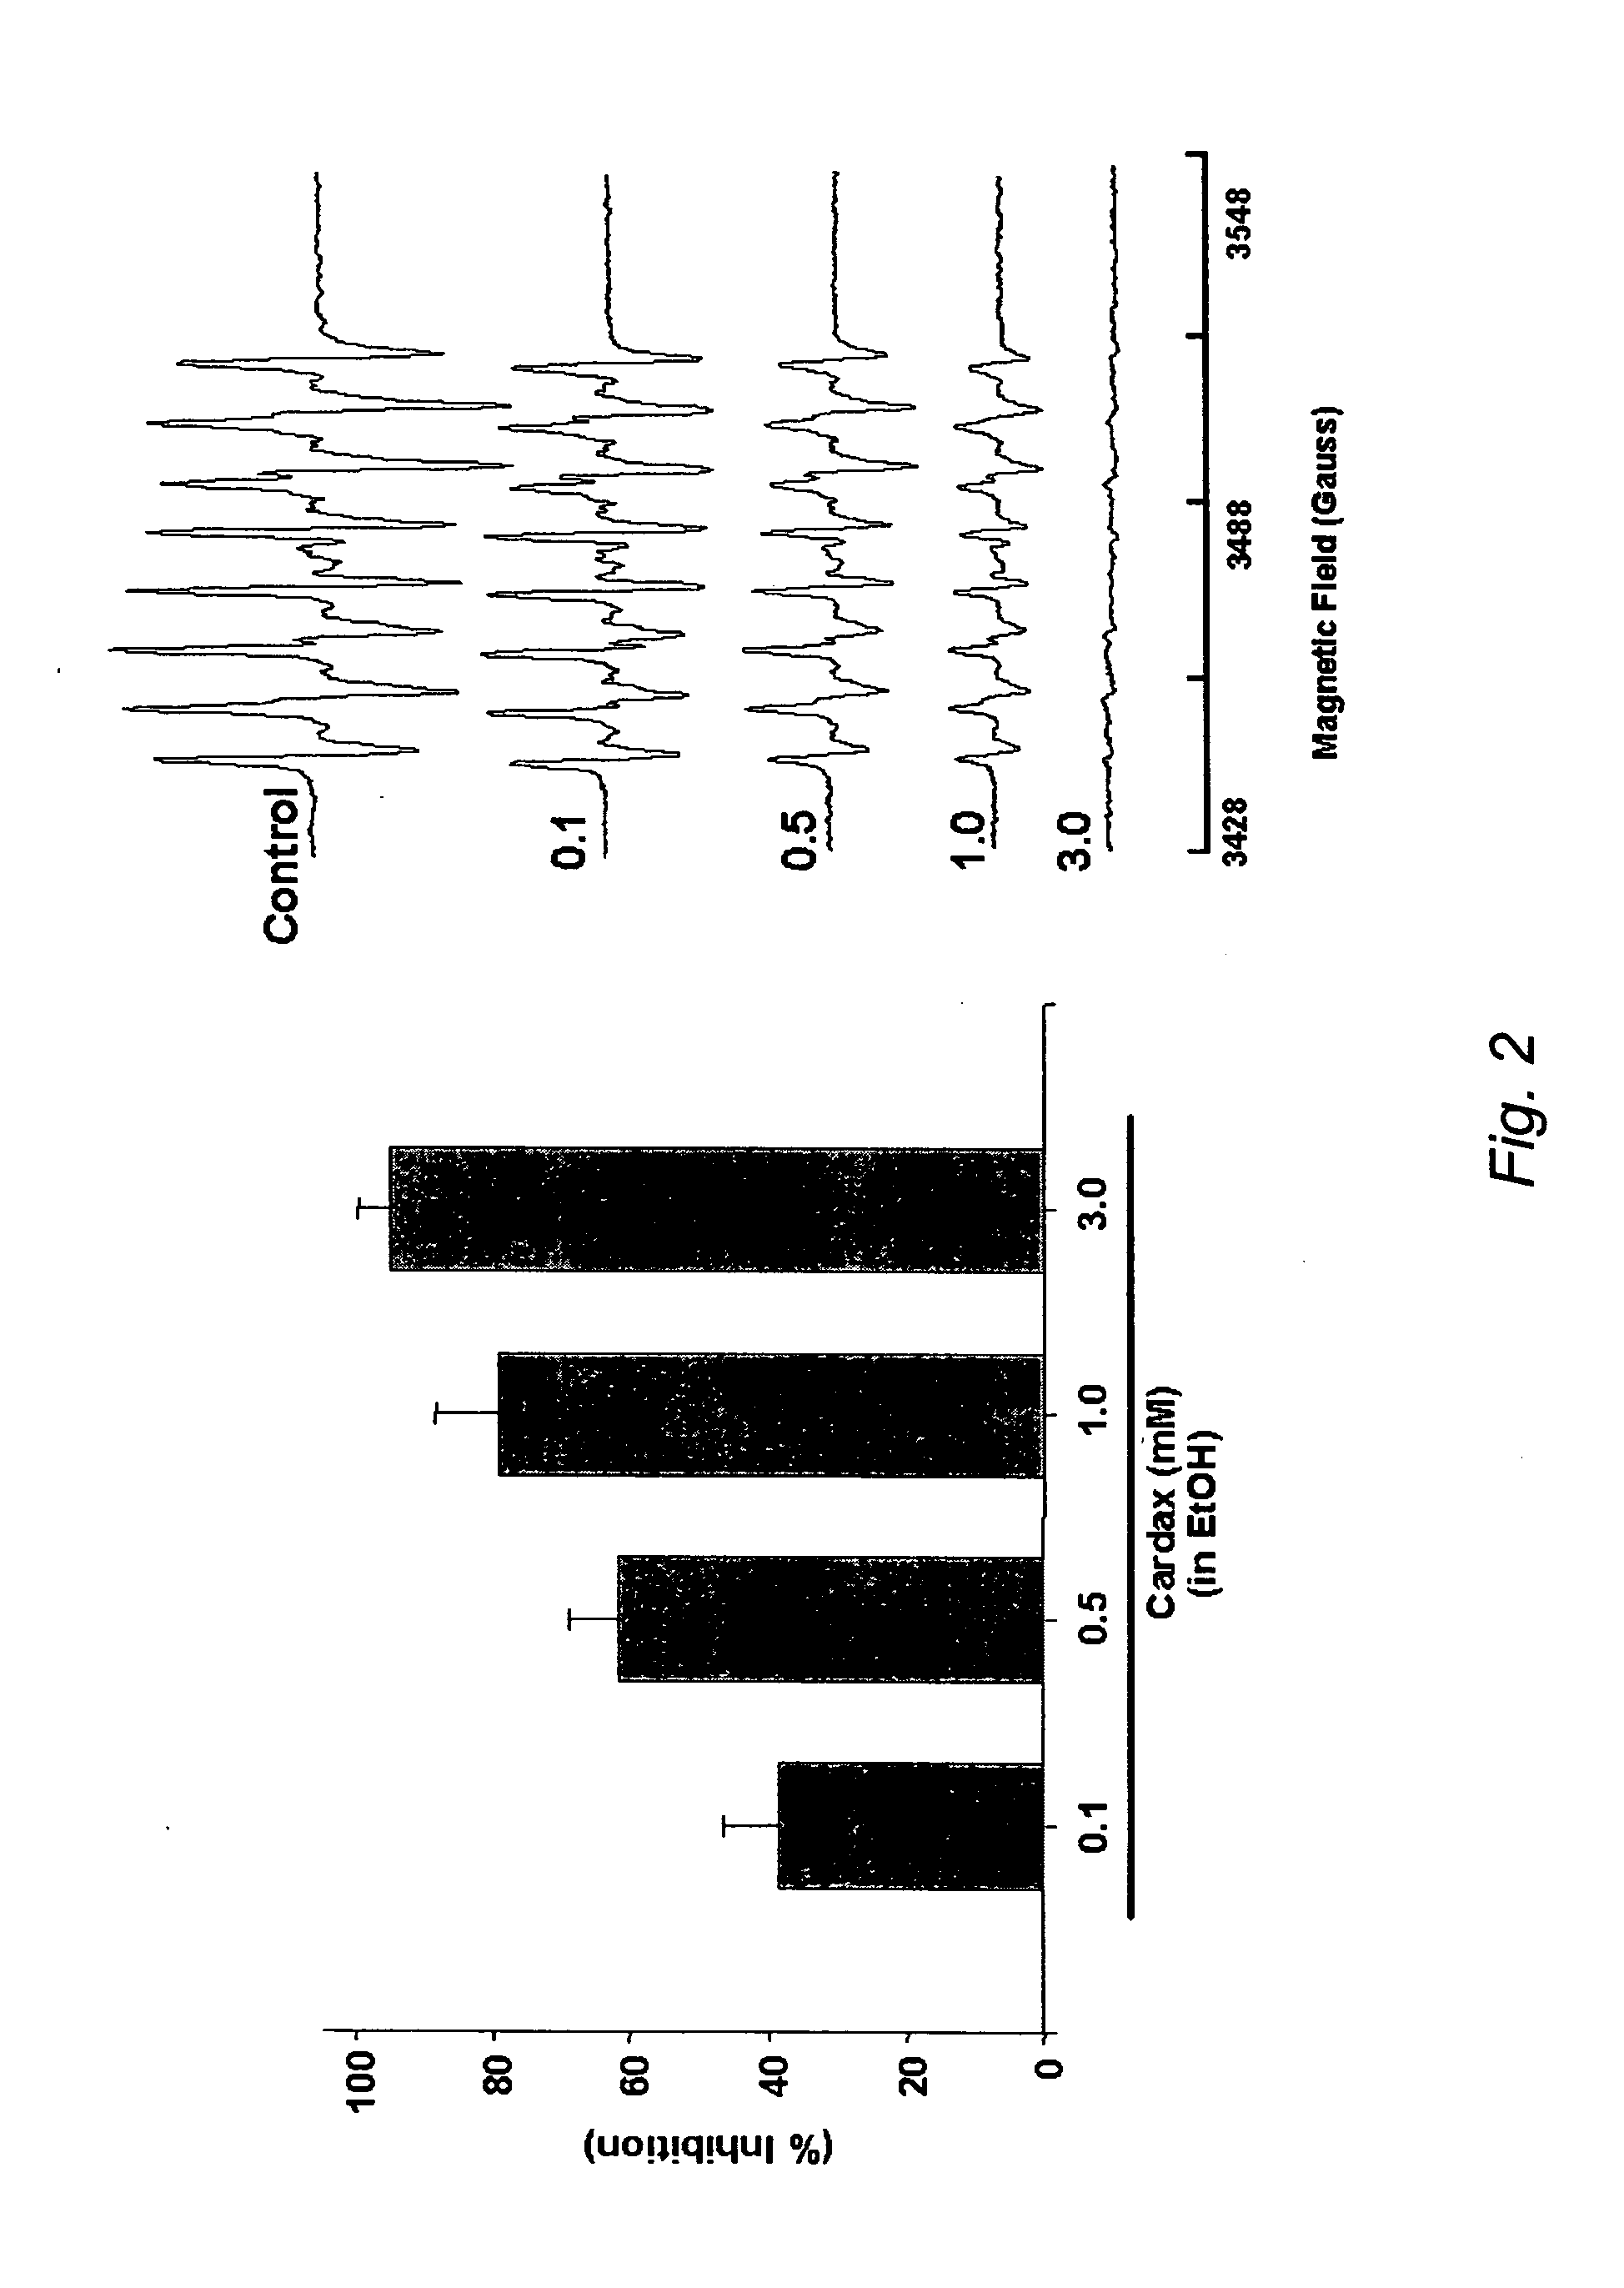 Carotenoid analogs or derivatives for controlling connexin 43 expression